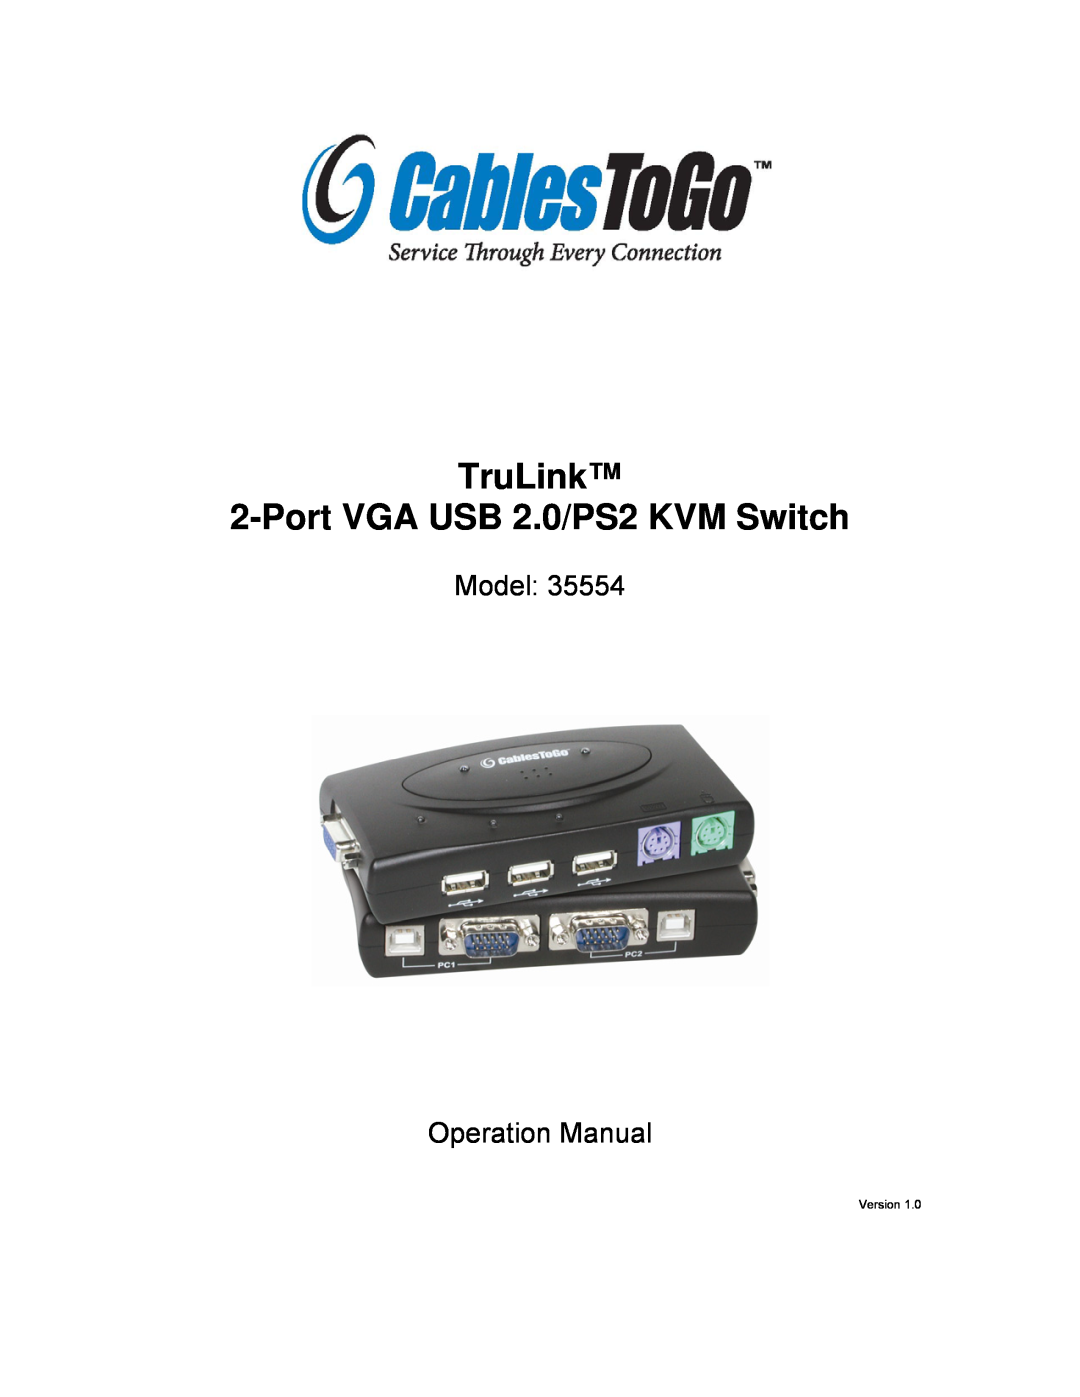 Cables to Go 35554 operation manual TruLink 2-Port VGA USB 2.0/PS2 KVM Switch, Version 